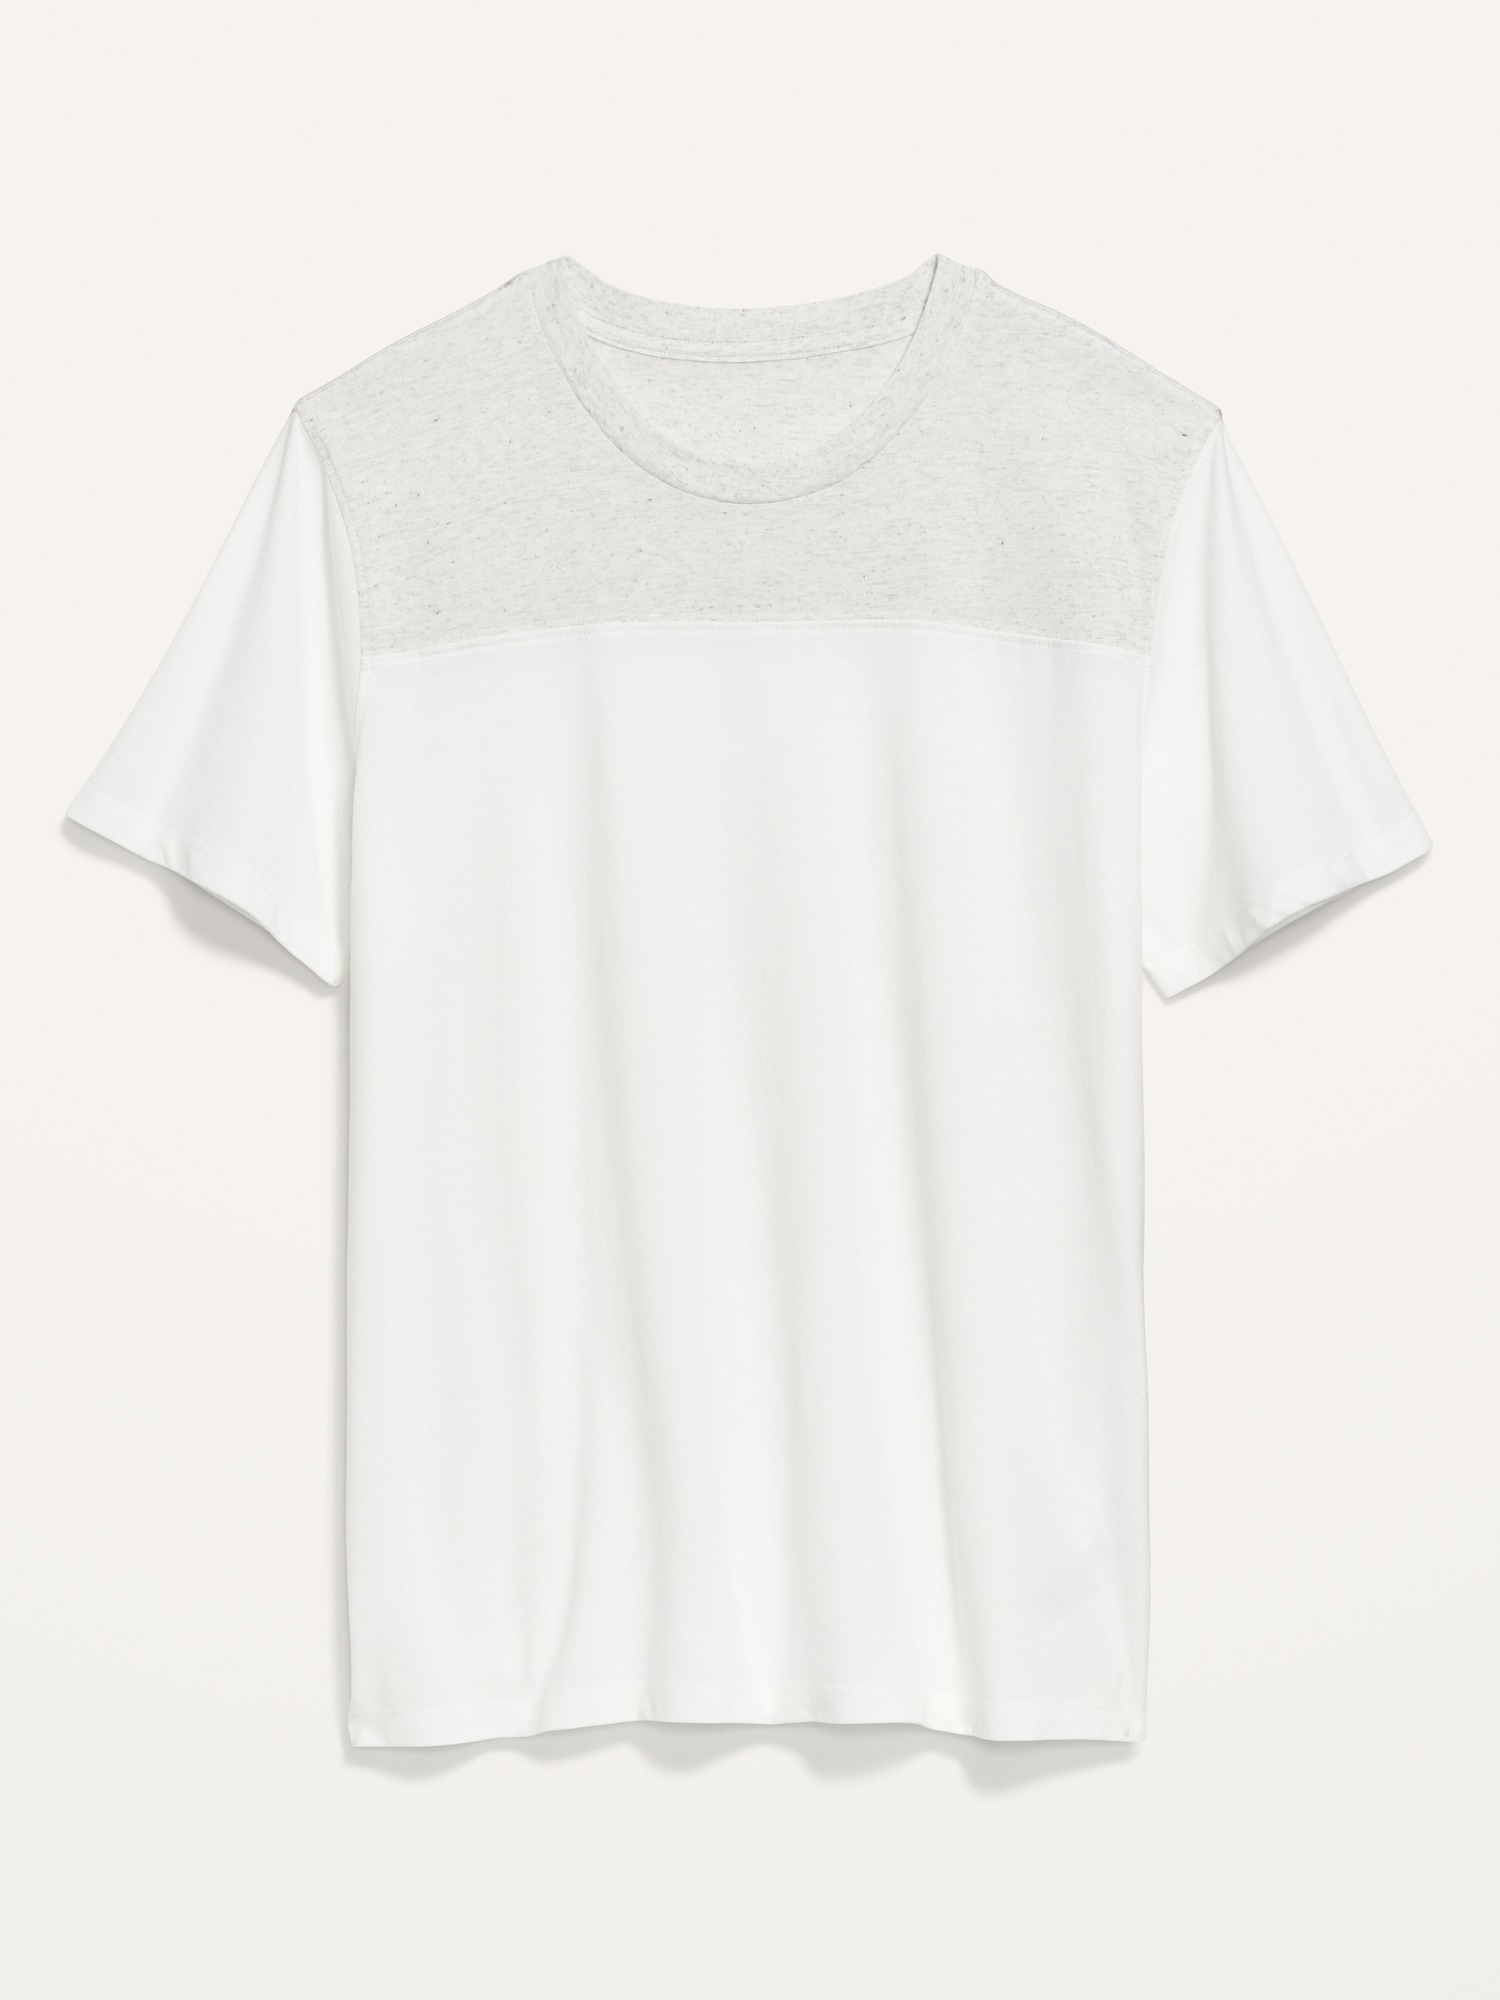 Soft-Washed Color-Block Football T-Shirt | Old Navy